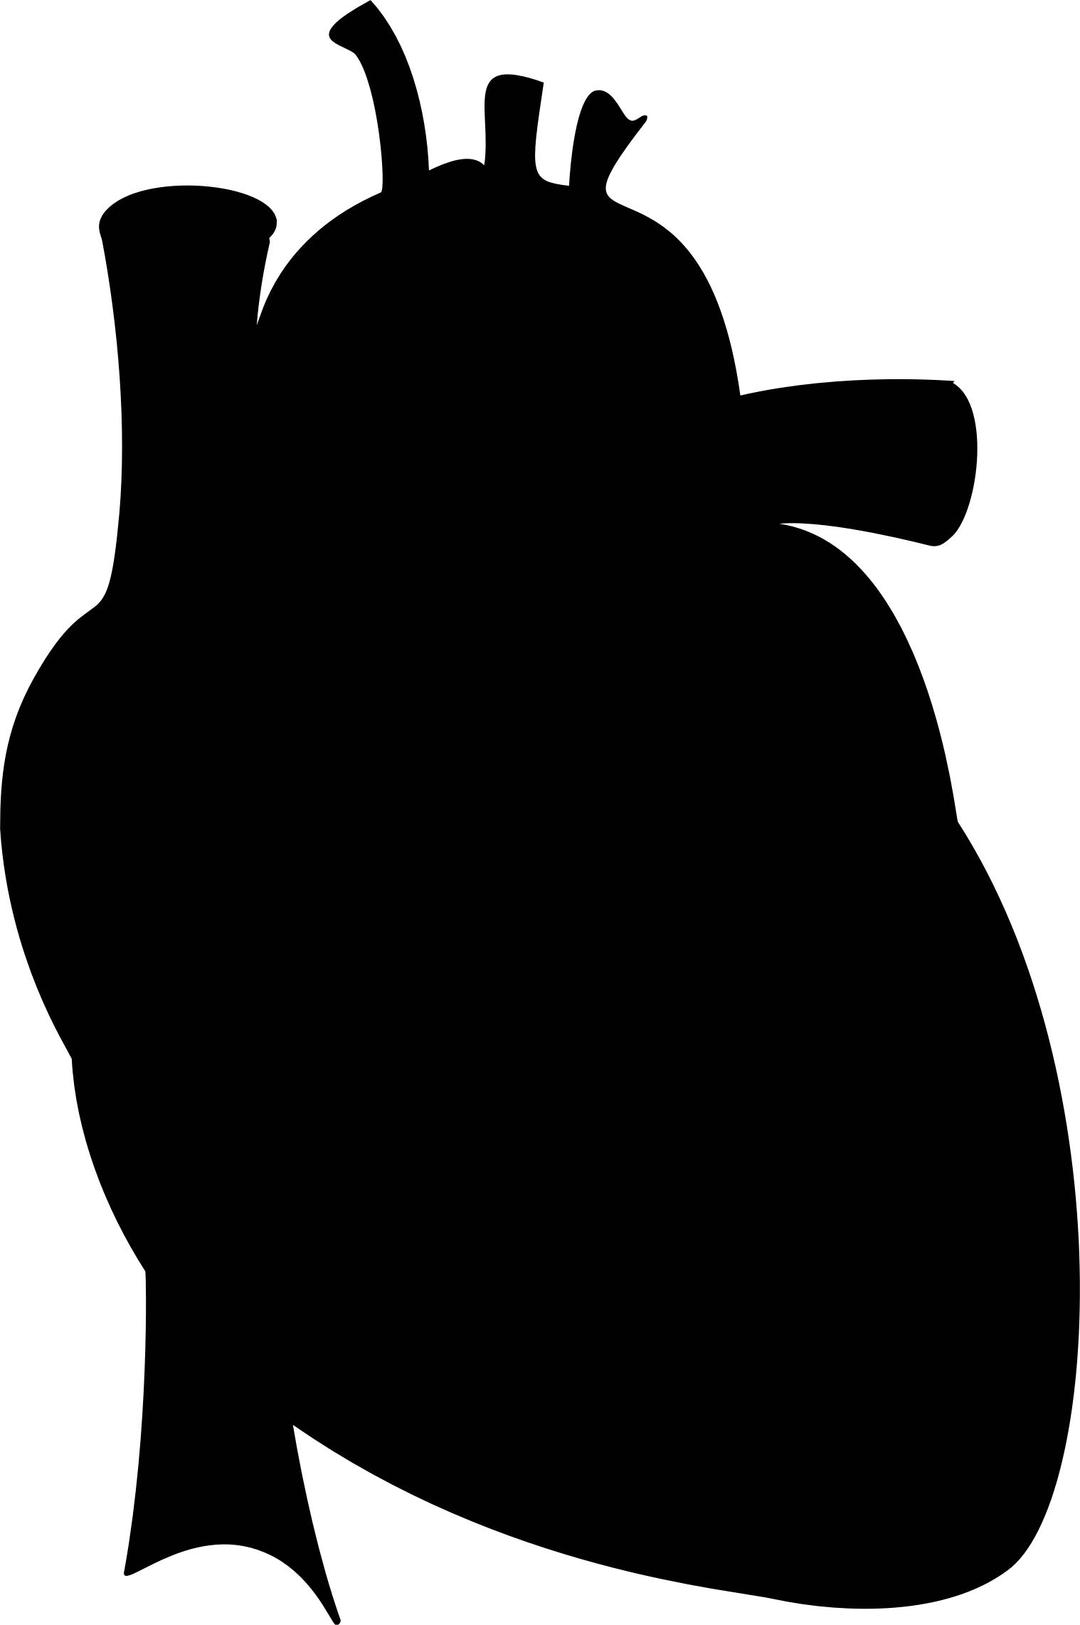 Realistic Heart Silhouette png transparent